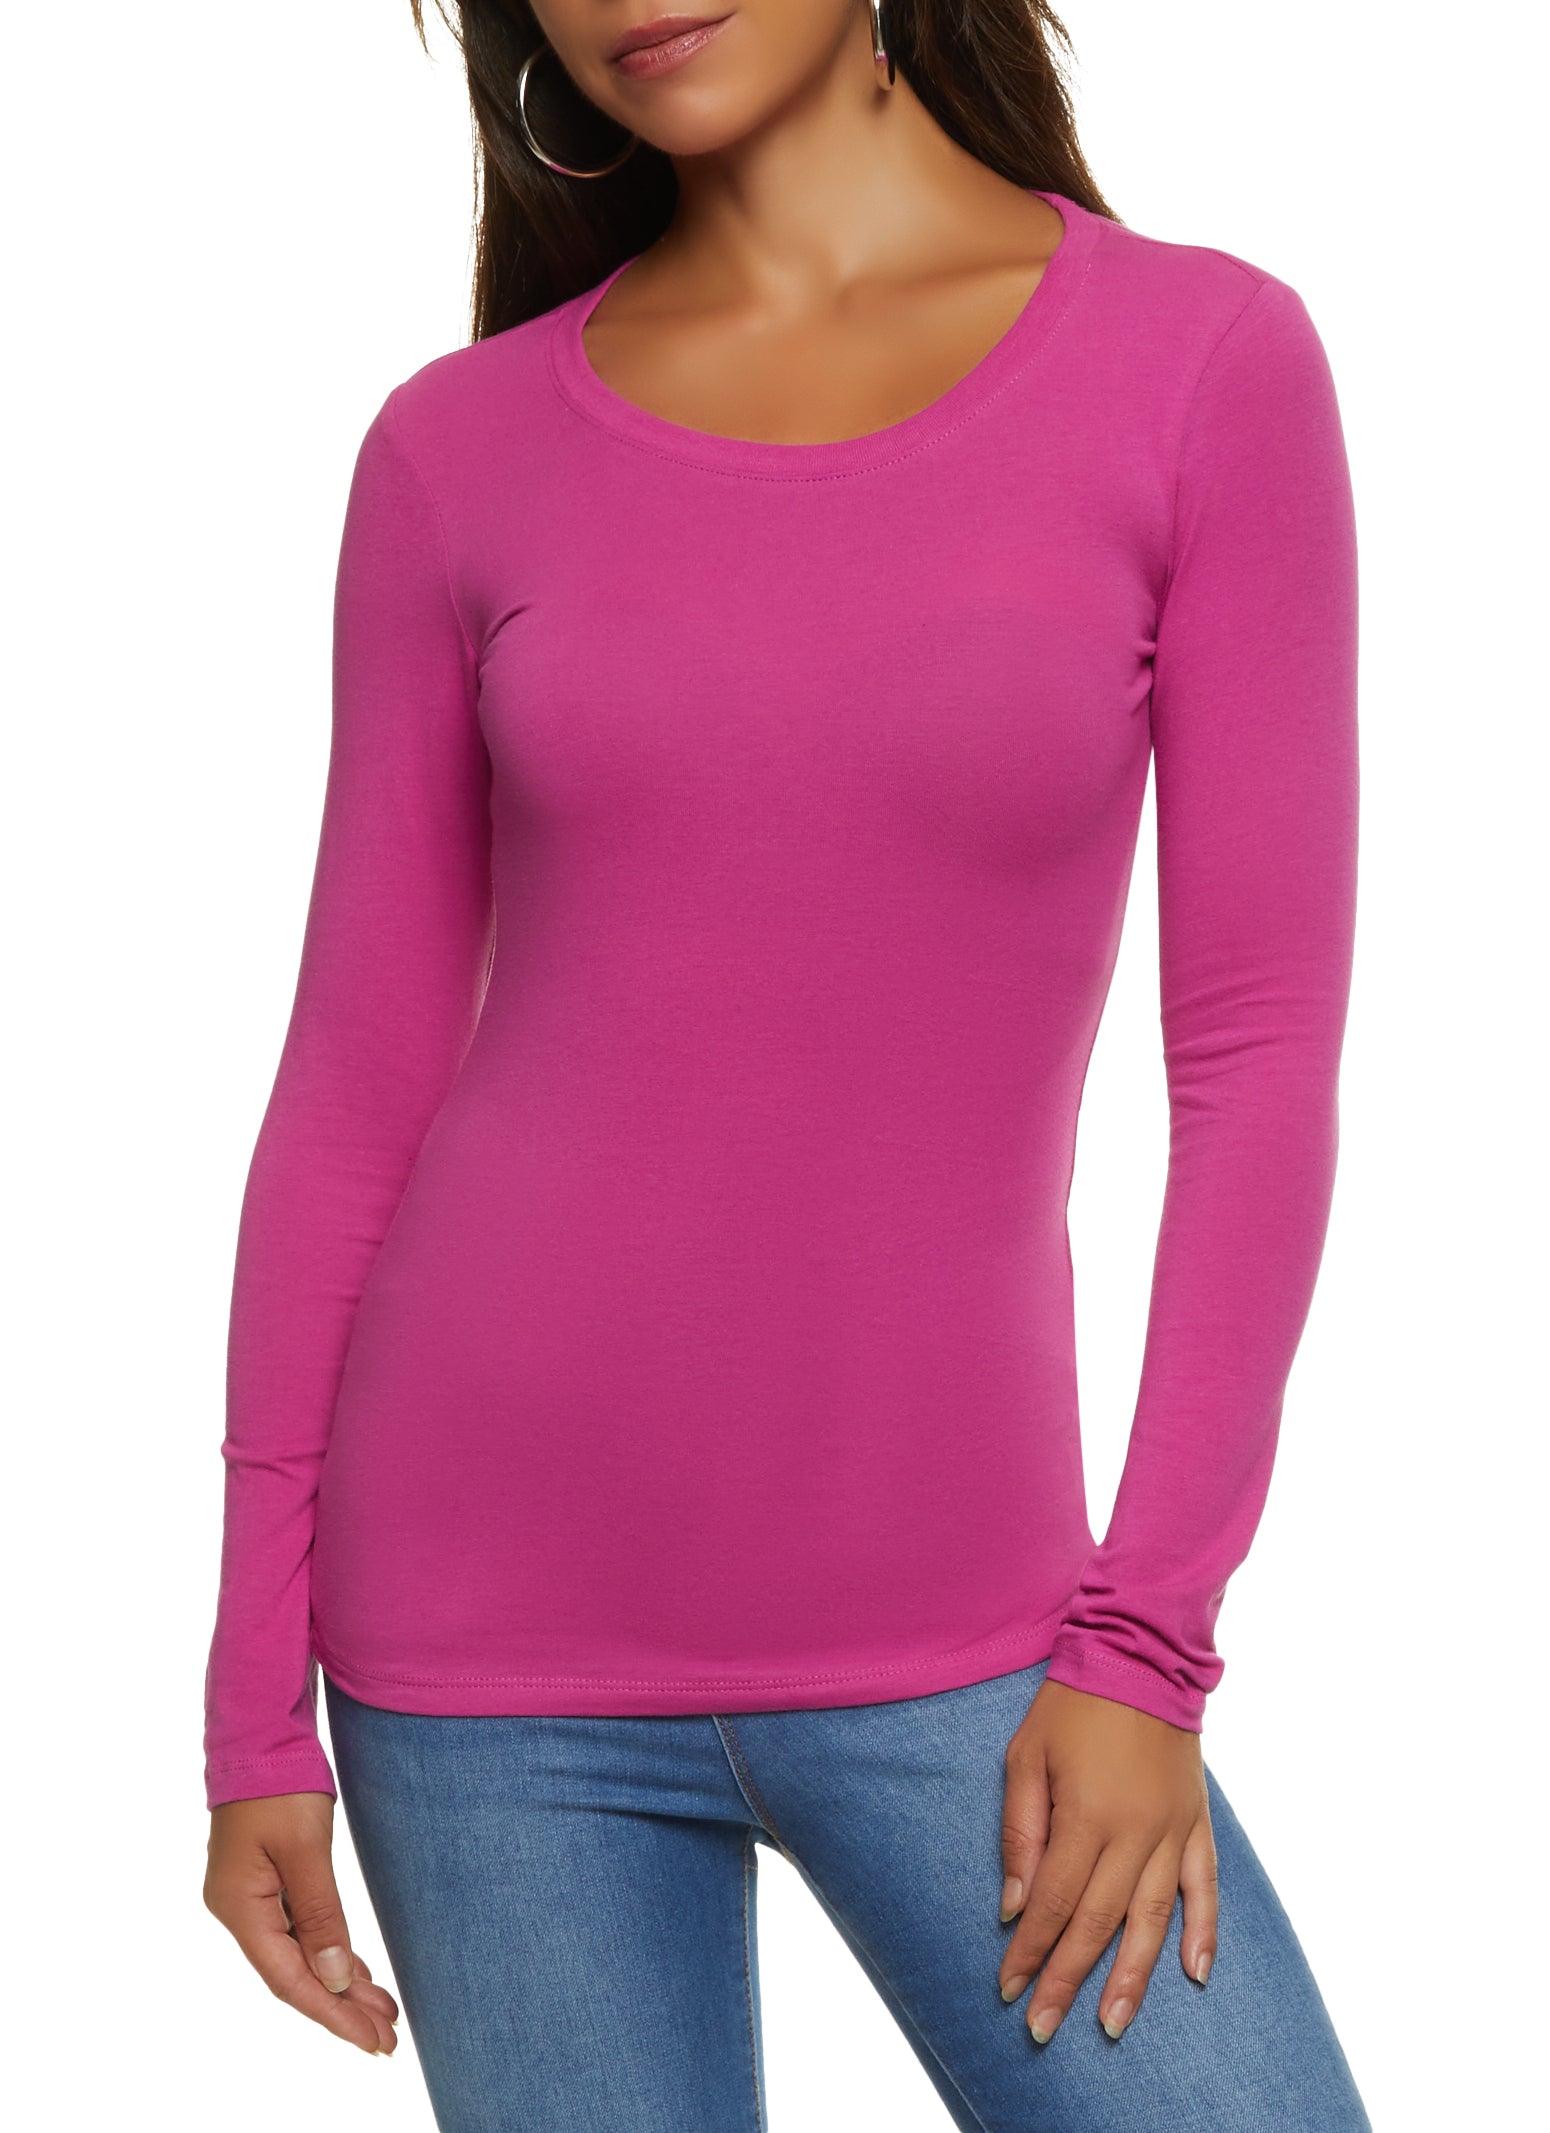 Clearance Long Sleeve Shirts for Women Sexy Womens V Neck T Shirts